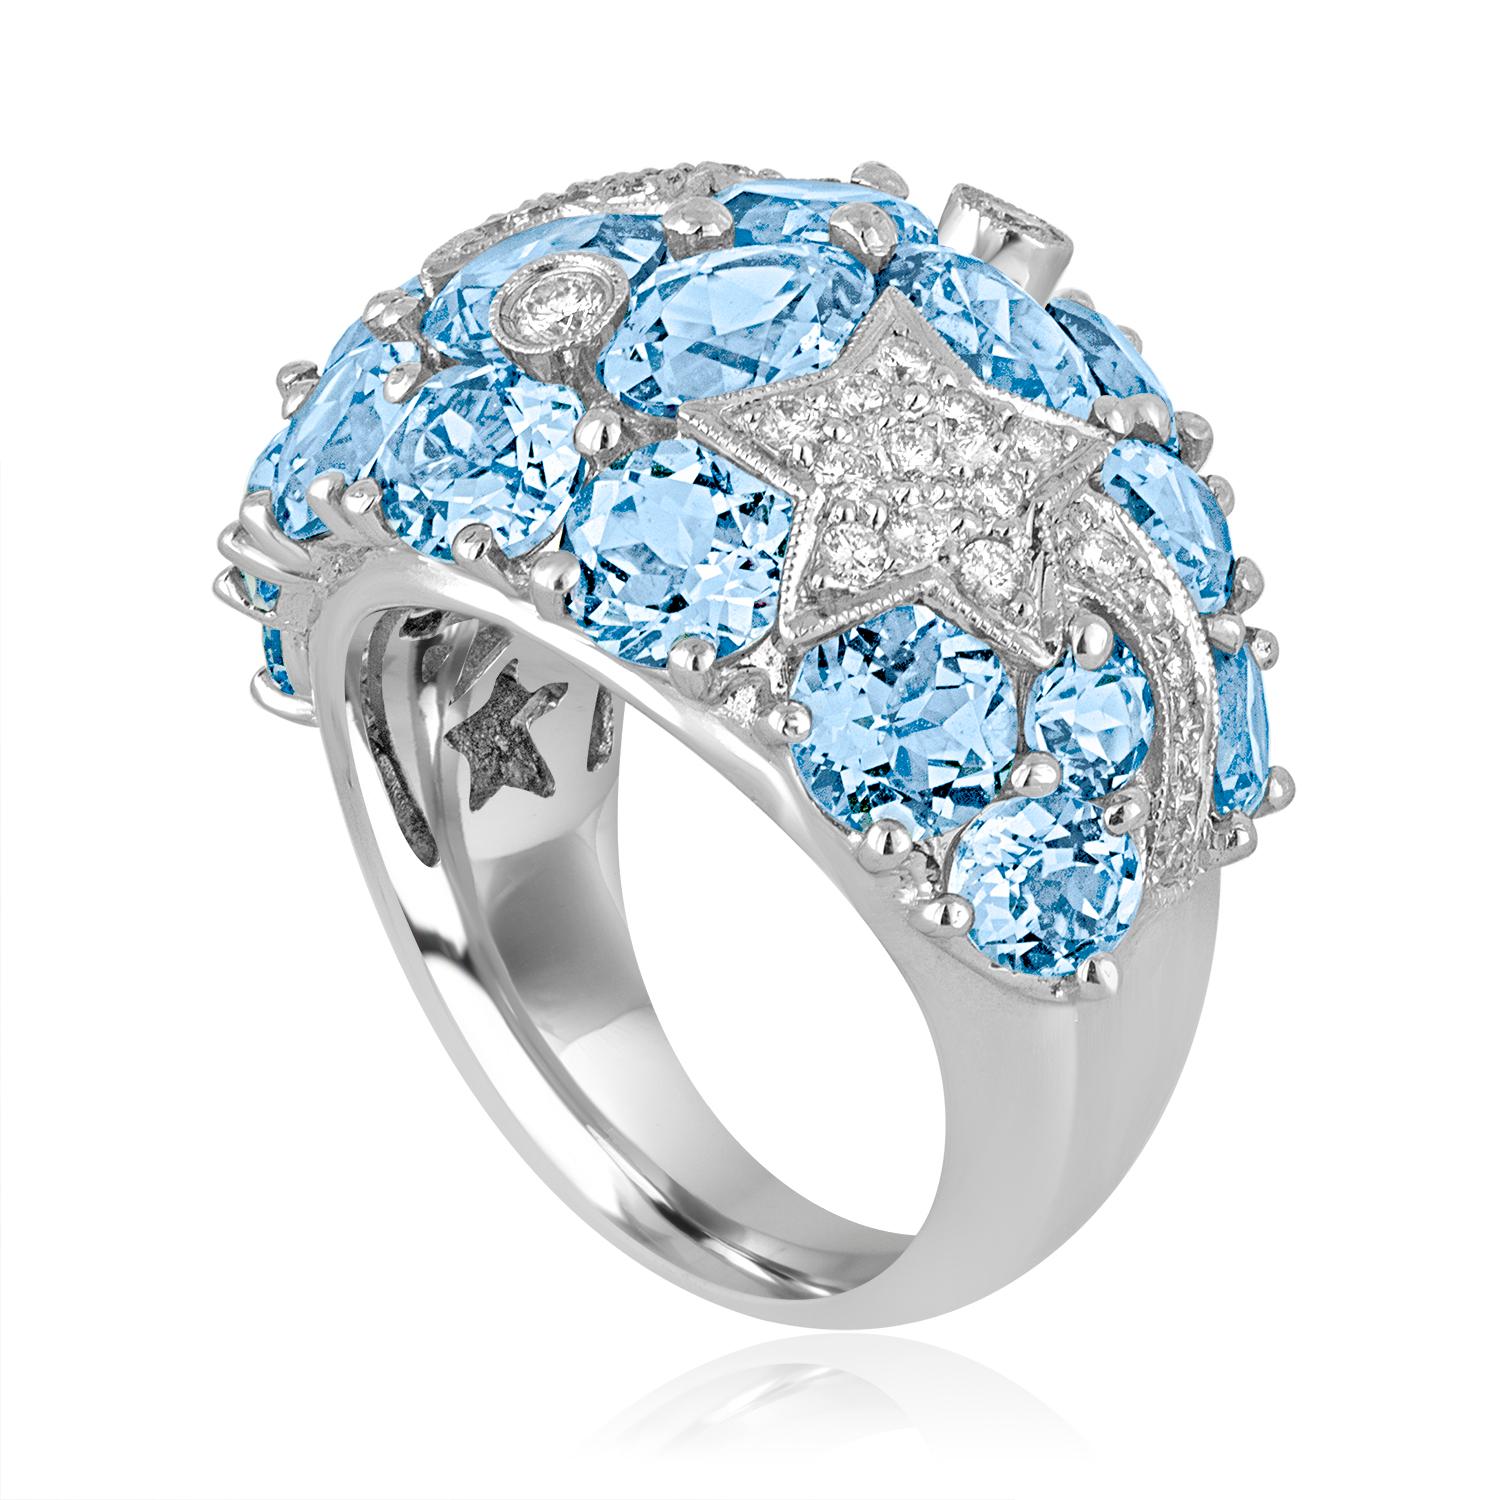 Fun Dome Ring
The ring is 18K White Gold
There are 0.50 Carts in Diamonds G SI
There are 15.00 Carats In Blue Topaz
The ring is a size 6.75, sizable.
The ring weighs 12.7 grams